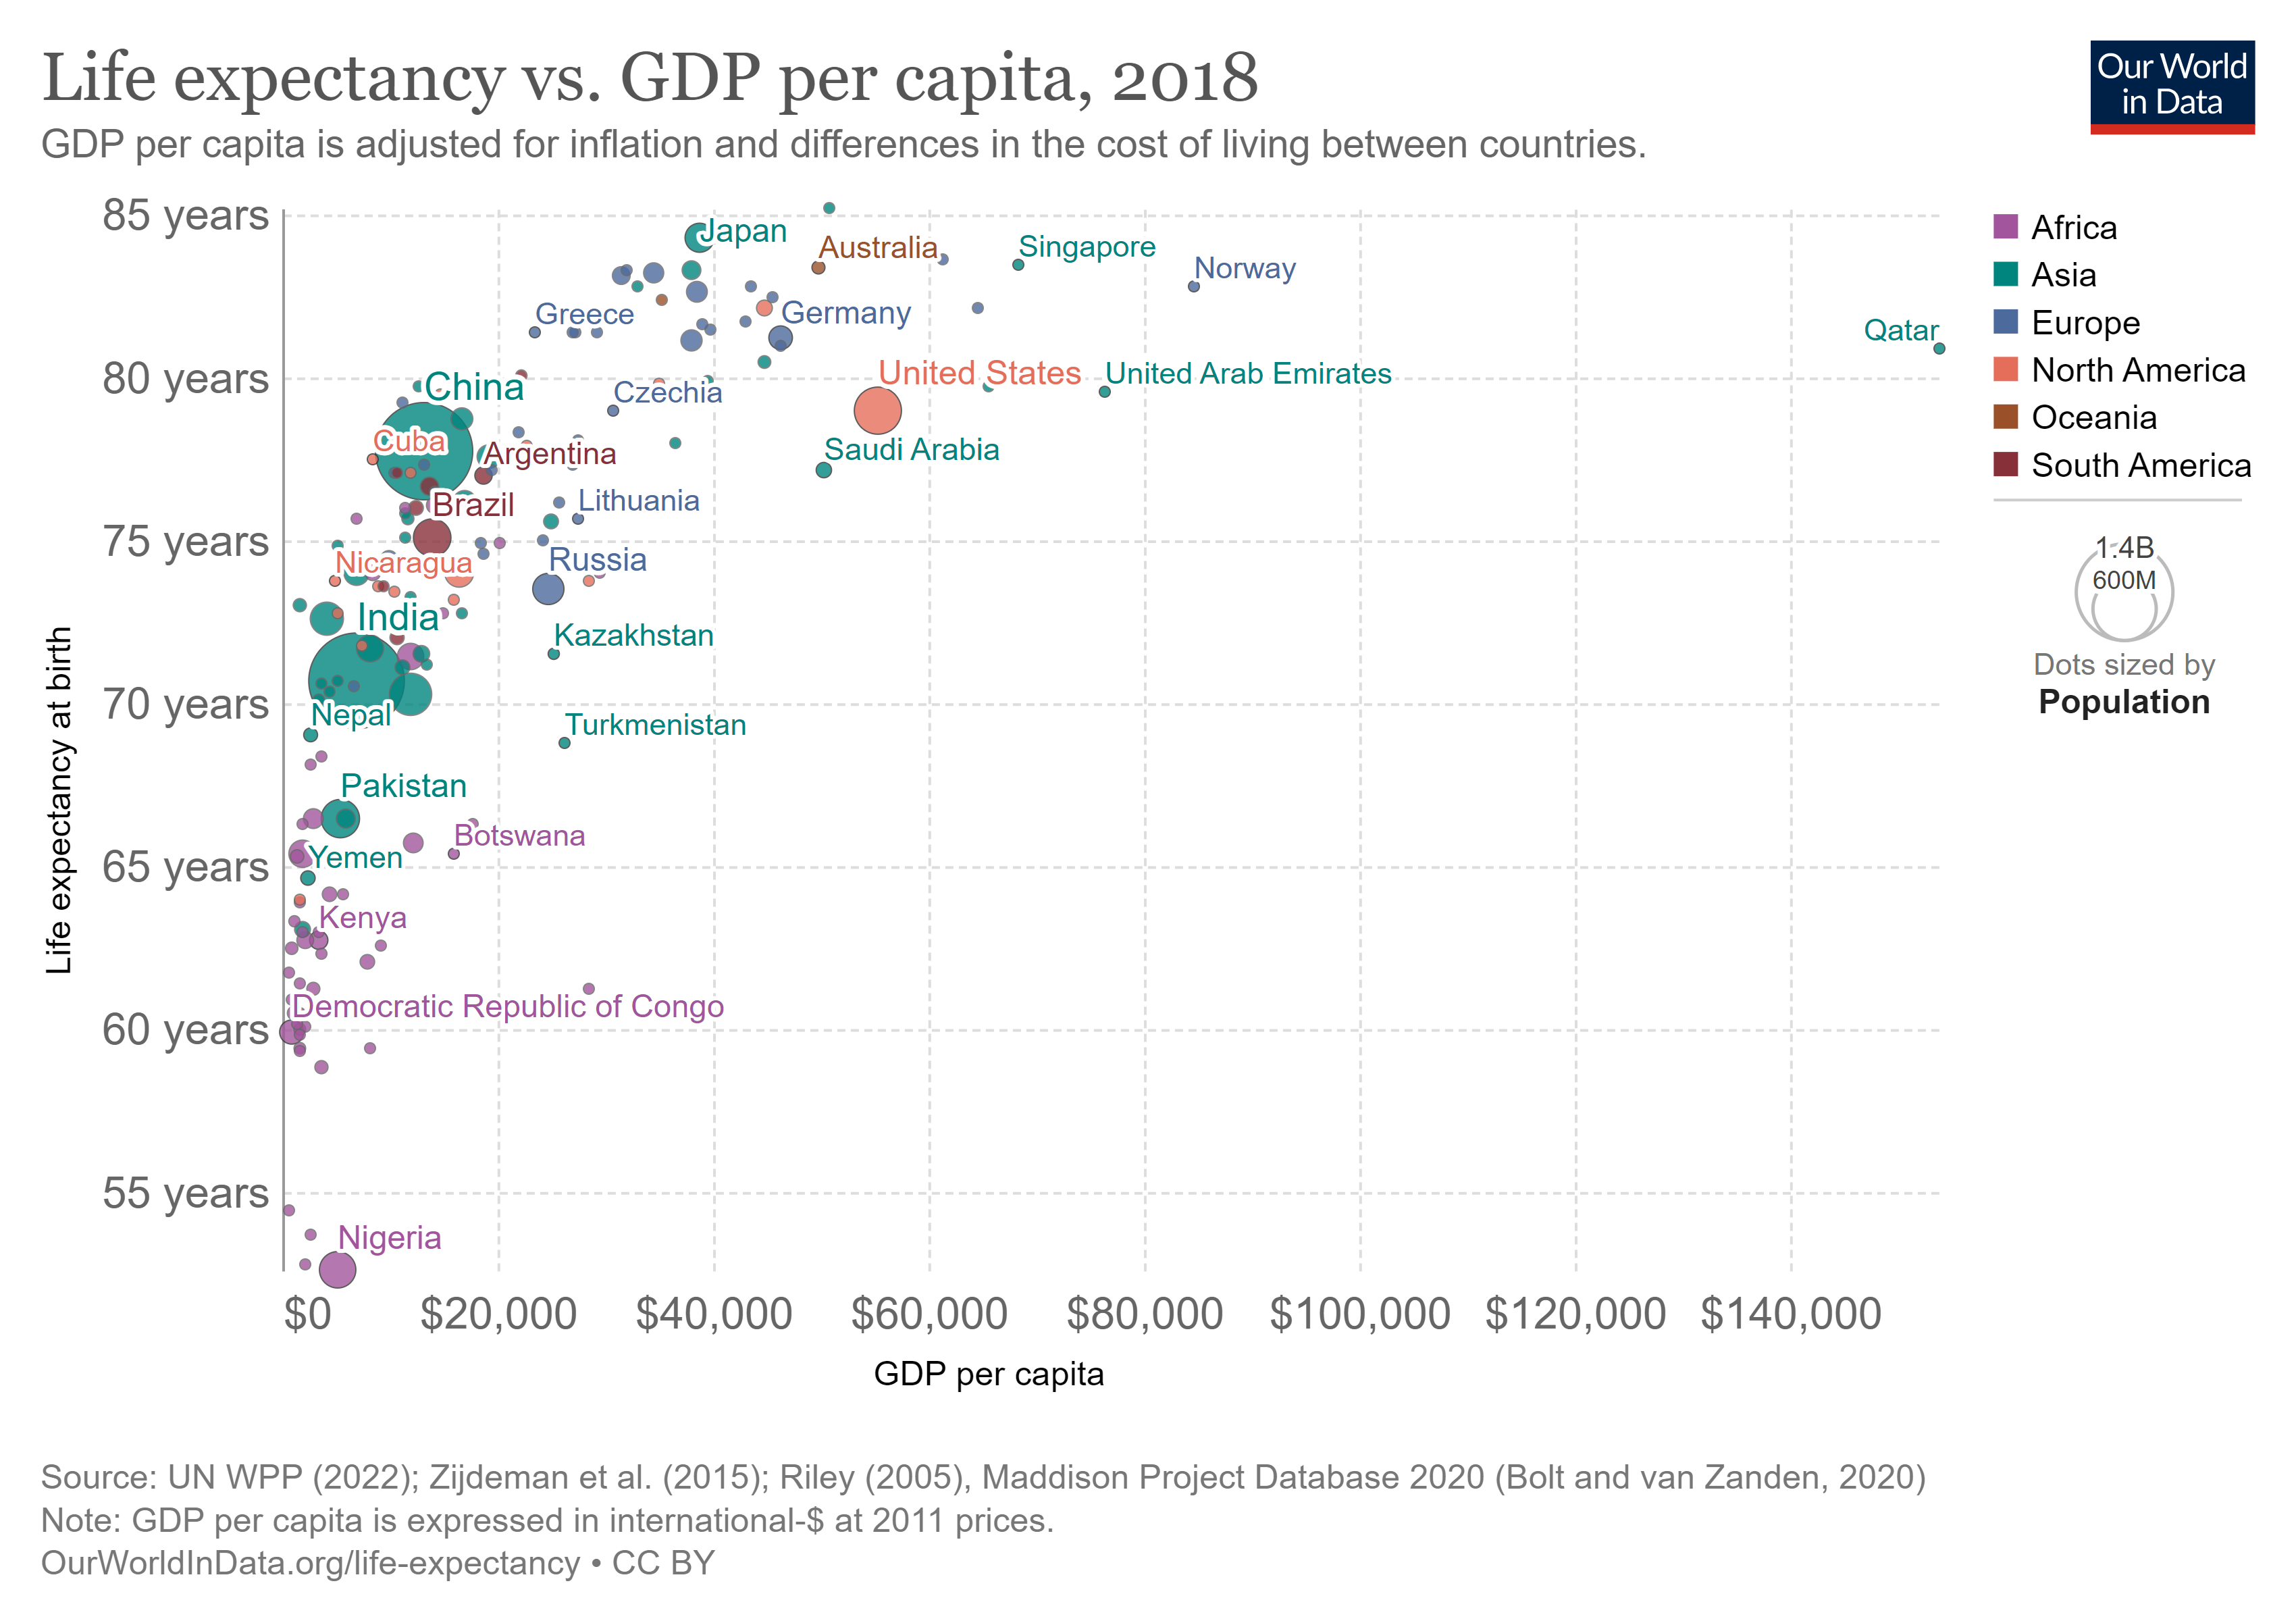 This graph shows life expectancy at birth in 2018 on the vertical axis and GDP per person (adjusted for inflation and the cost of living) in 2018 on the horizontal axis. We see that generally, the poorest countries have the lowest life expectancy at birth. As income grows, life expectancy increases, but at a diminishing rate. Life expectancy surges up rapidly as countries approach achieving a GDP per capita of $20,000 per year. At this point, life expectancy is typically at least 75 years. Further increases in life expectancy are not achieved with small improvements in GDP per capita.